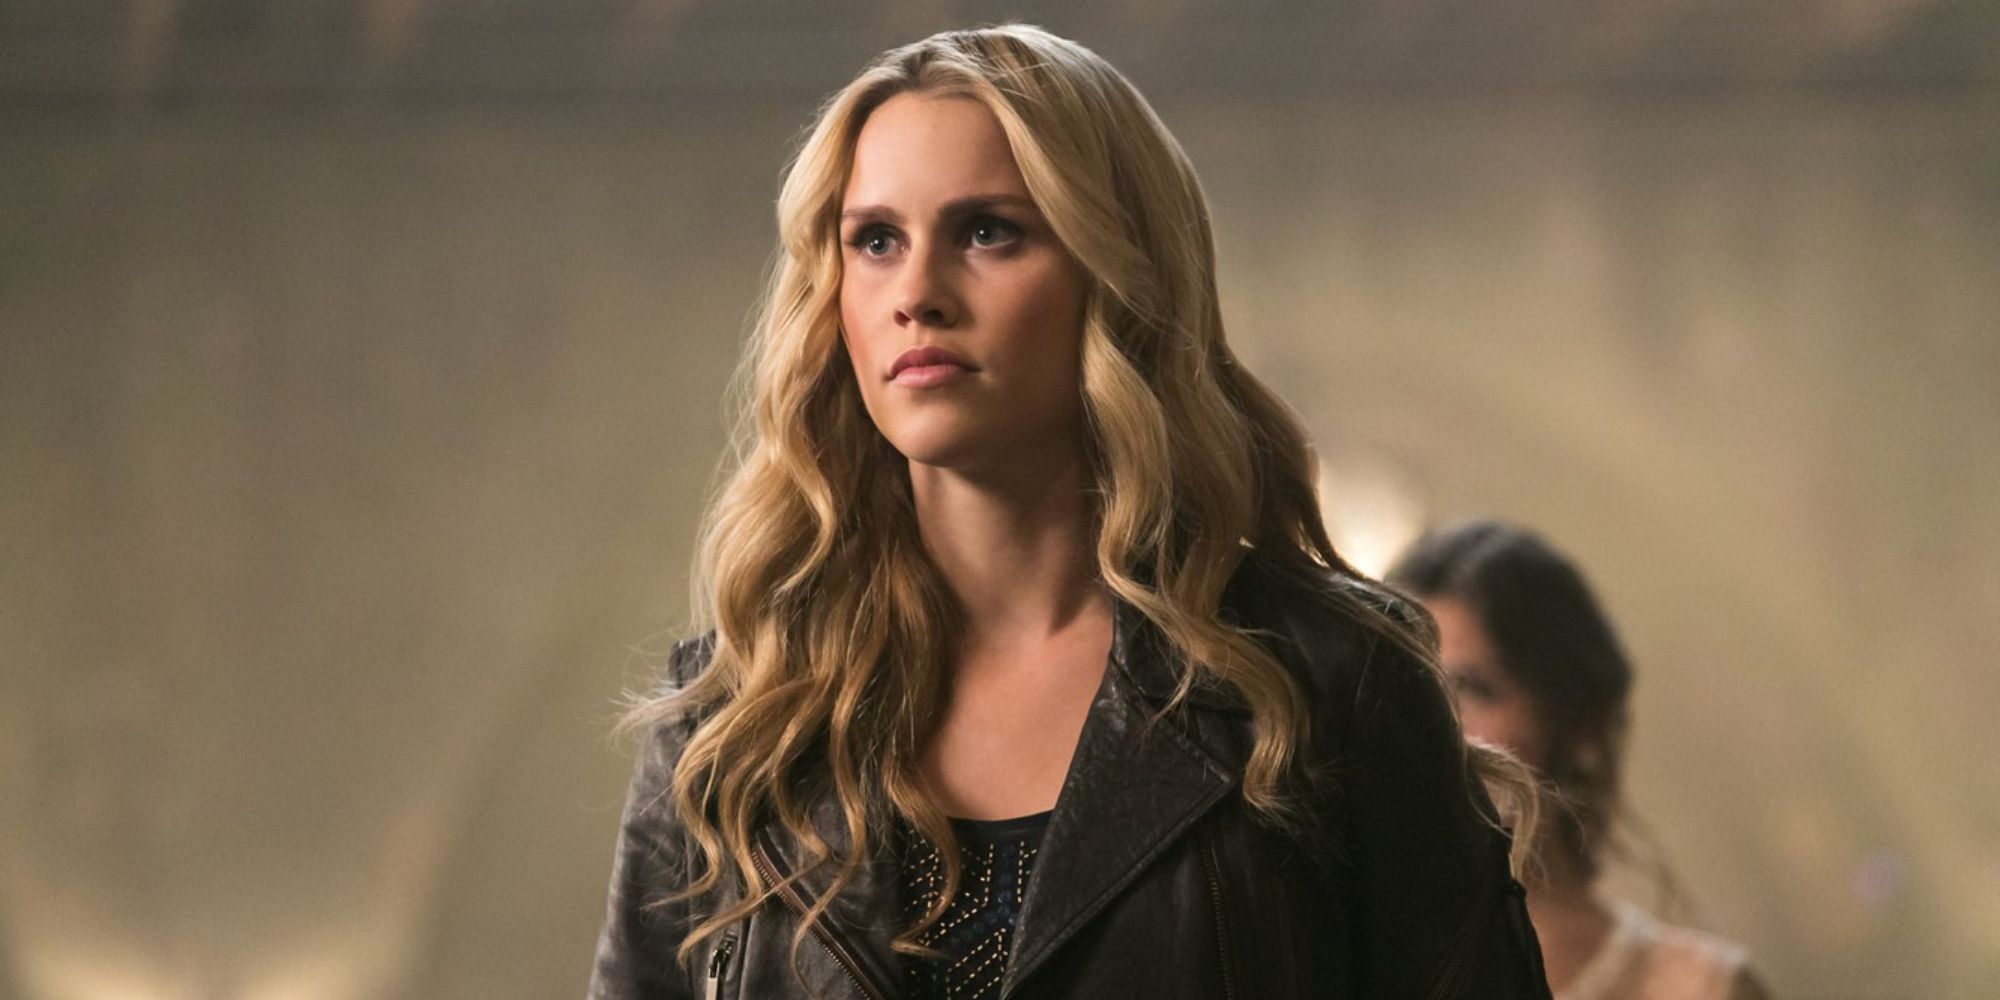 Claire Holt as Rebekah Mikaelson looking intently off camera in The Vampire Diaries